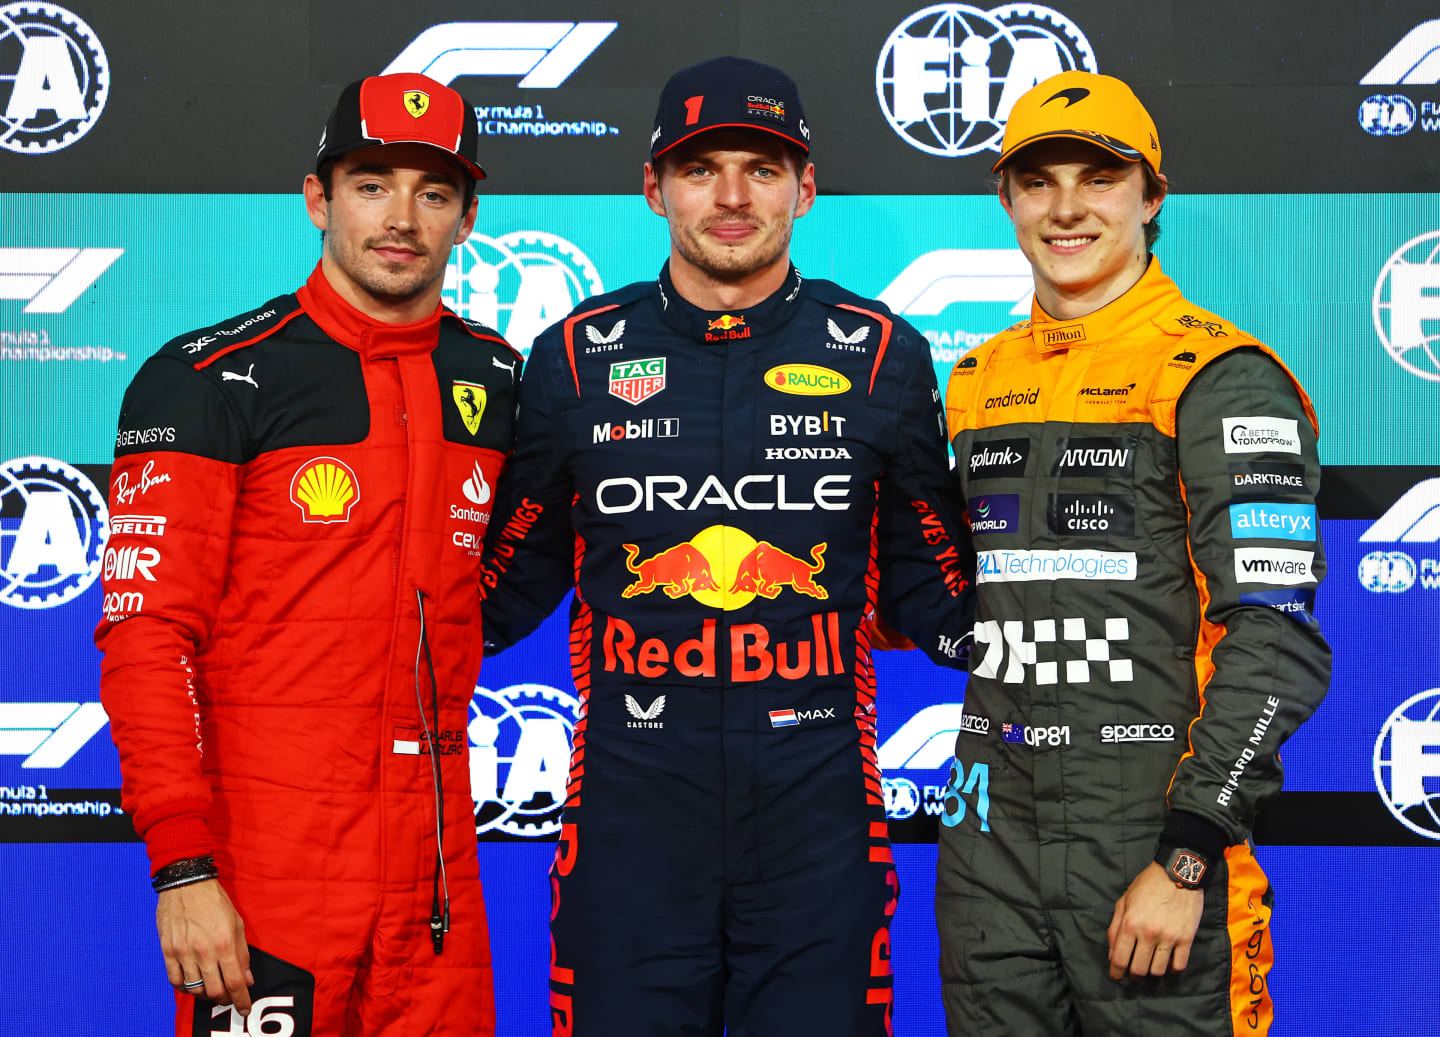 ABU DHABI, UNITED ARAB EMIRATES - NOVEMBER 25: Pole position qualifier Max Verstappen of the Netherlands and Oracle Red Bull Racing (C), Second placed qualifier Charles Leclerc of Monaco and Ferrari (L) and Third placed qualifier Oscar Piastri of Australia and McLaren (R) pose for a photo in parc ferme during qualifying ahead of the F1 Grand Prix of Abu Dhabi at Yas Marina Circuit on November 25, 2023 in Abu Dhabi, United Arab Emirates. (Photo by Mark Thompson/Getty Images)